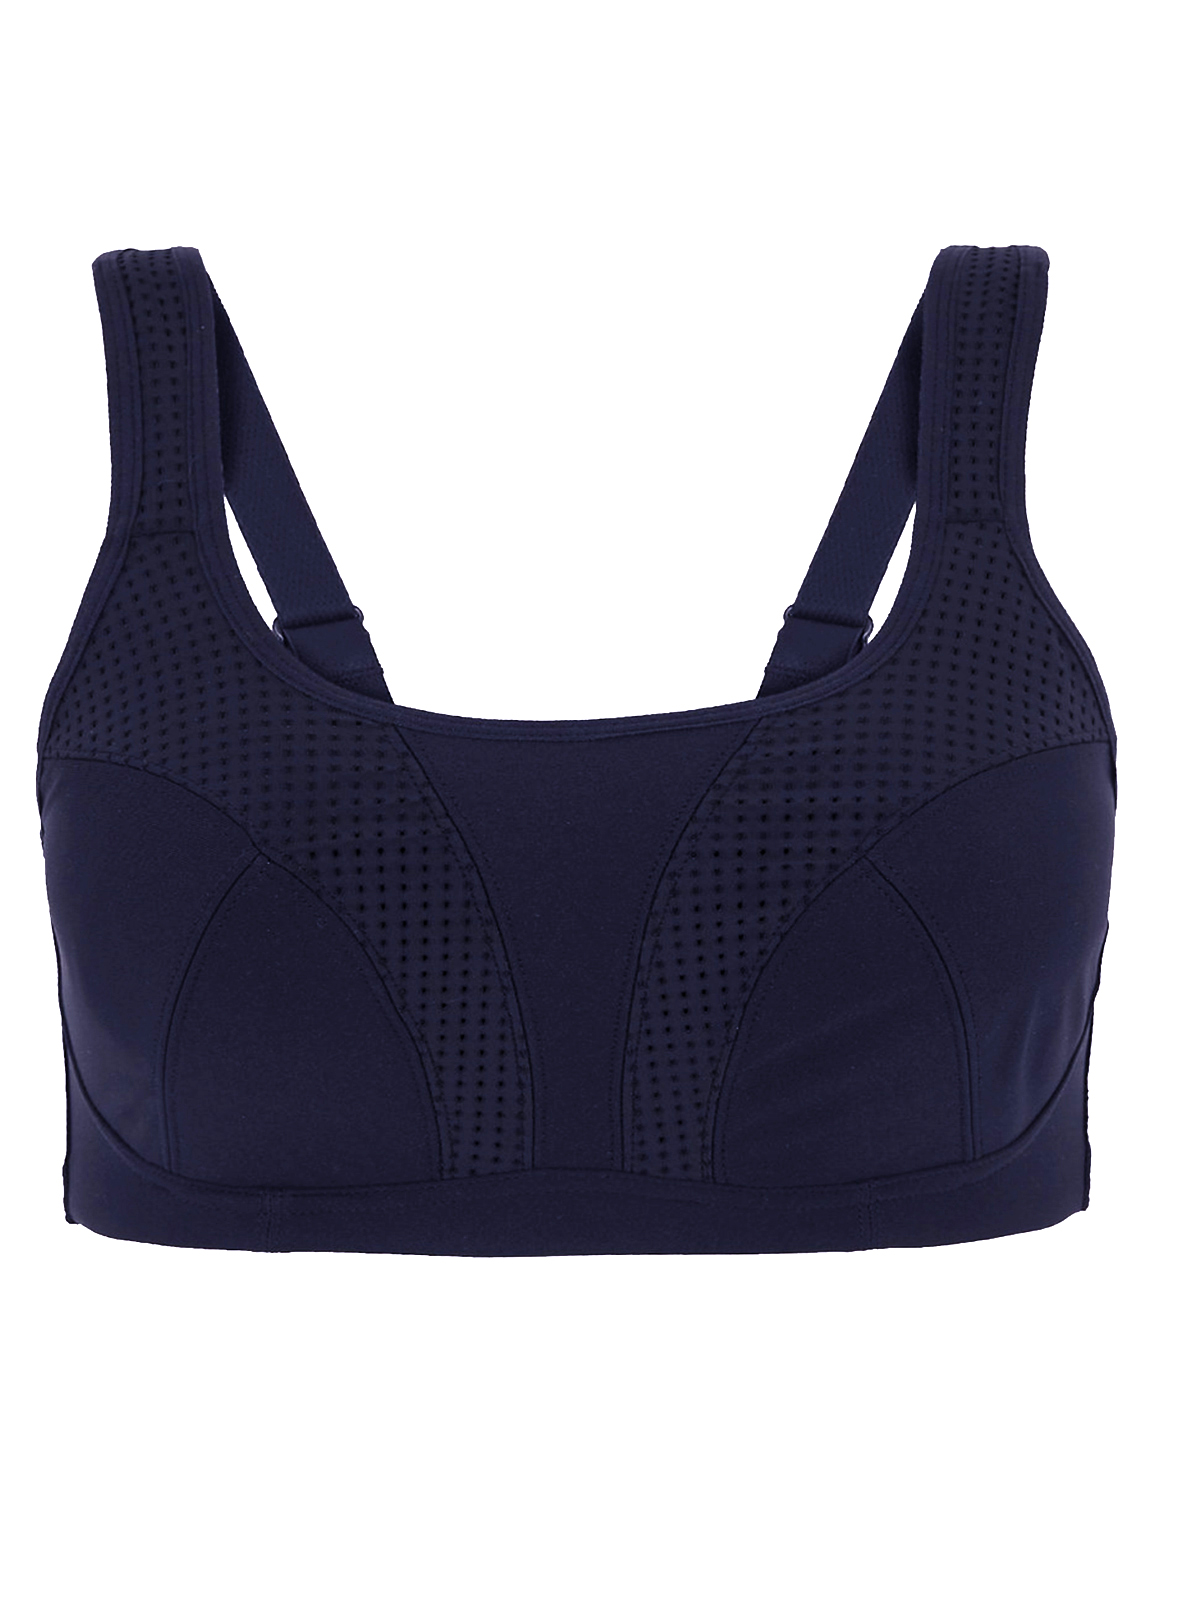 Marks and Spencer - - M&5 NAVY High Impact Non-Wired Sports Bra - Size ...